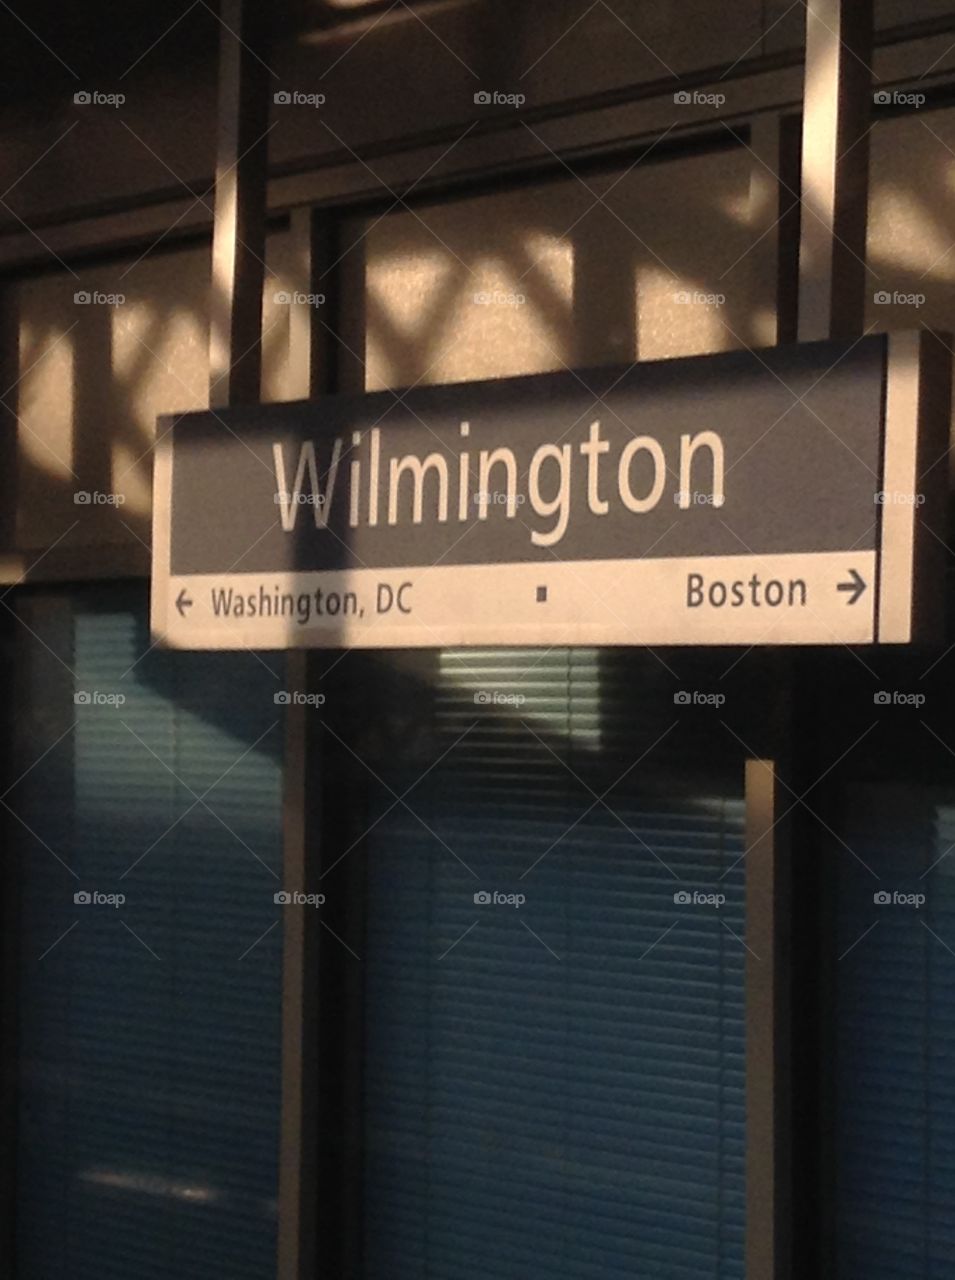 Wilmington Train Station Sign